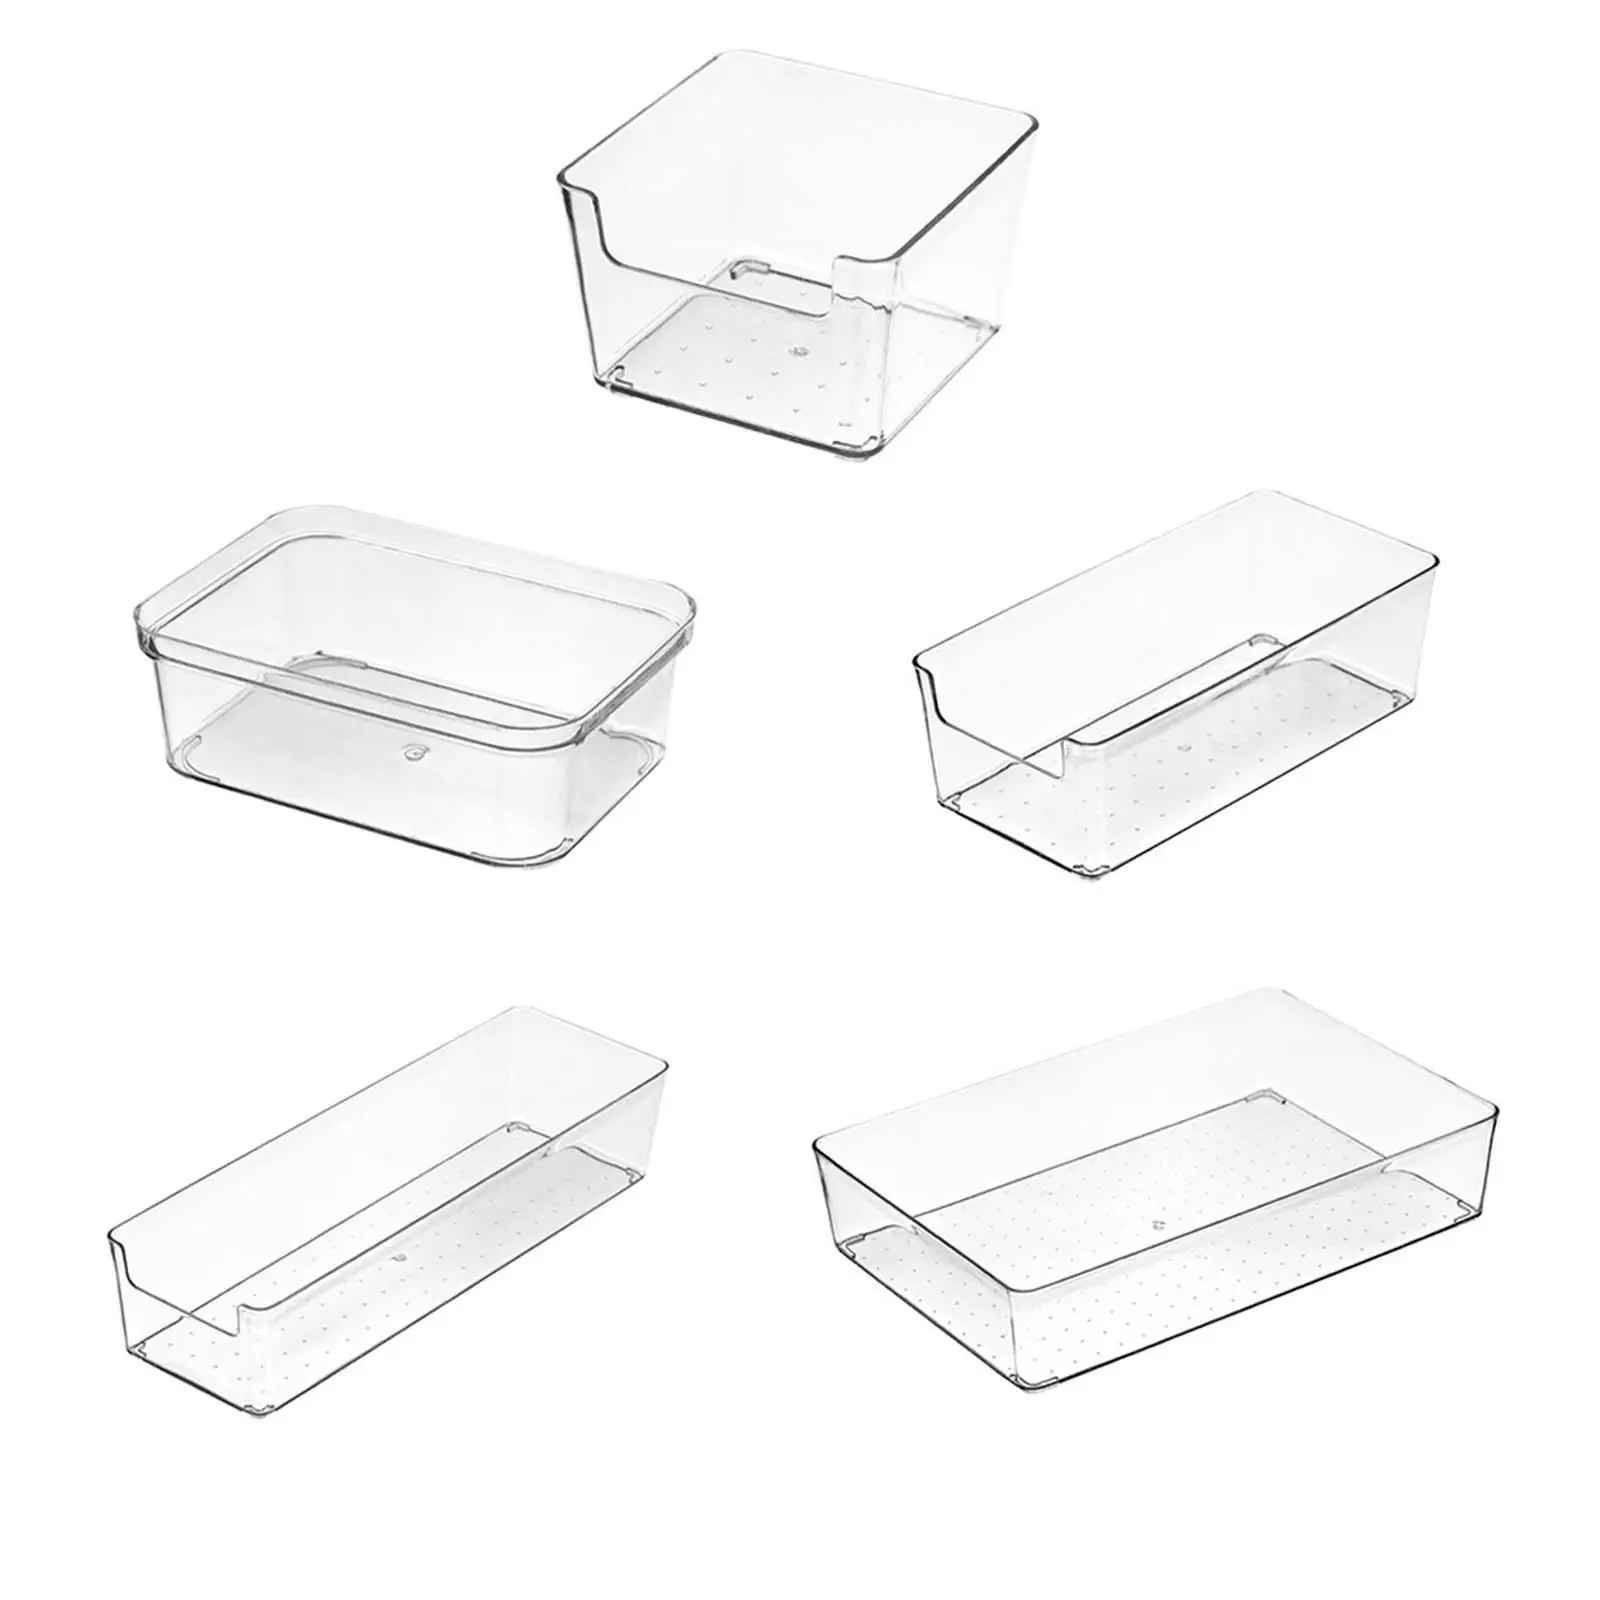 5 Pieces Drawer Storage Box Multi Use Vanity Trays Defferent Sizes Transparent for Home Bathroom Office Shelf Serving Utensils